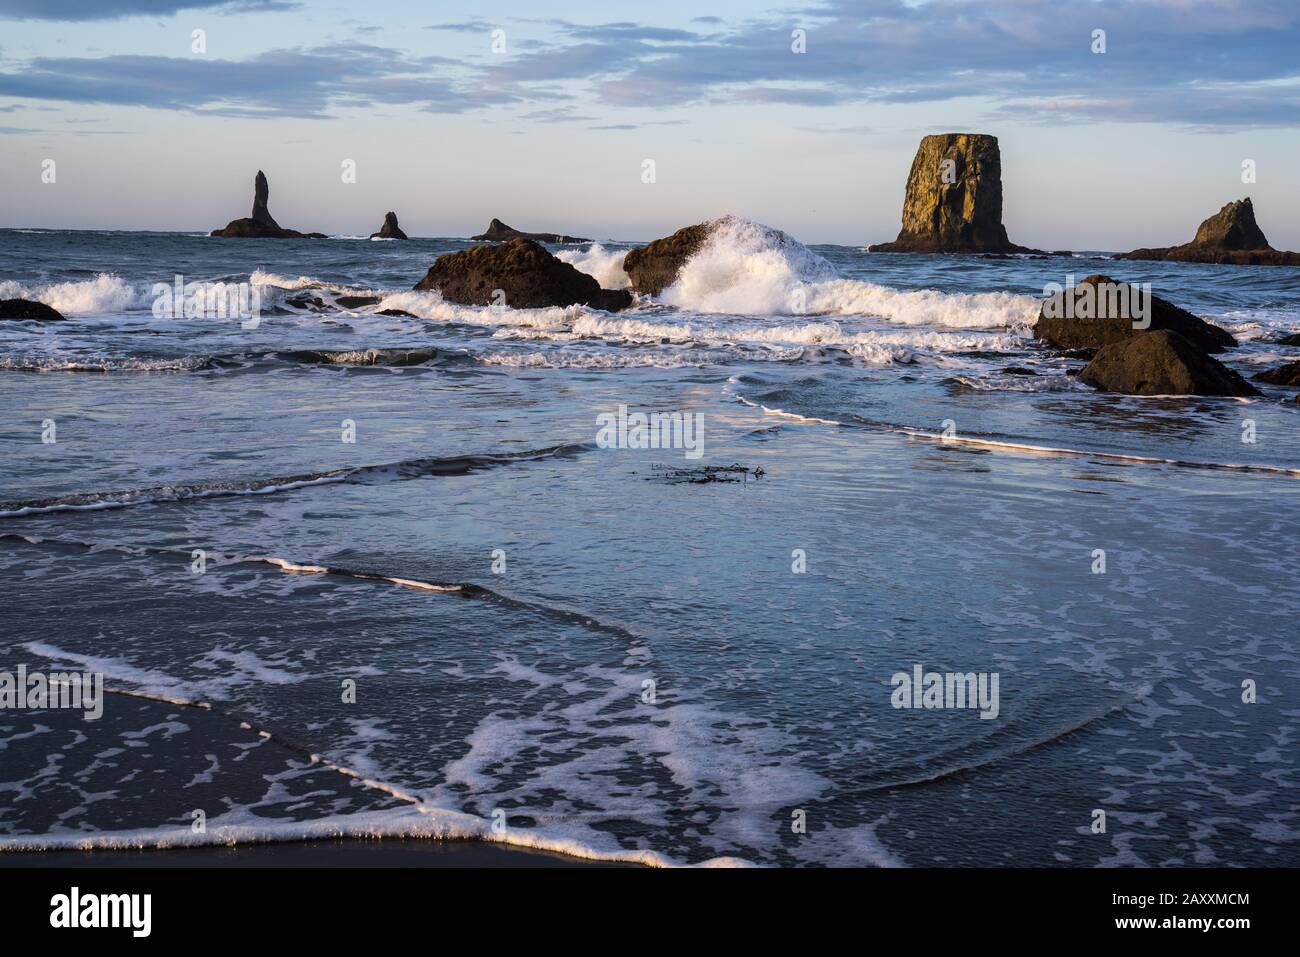 Islands of stone and crashing waves at the beach, Olympic National Park Stock Photo